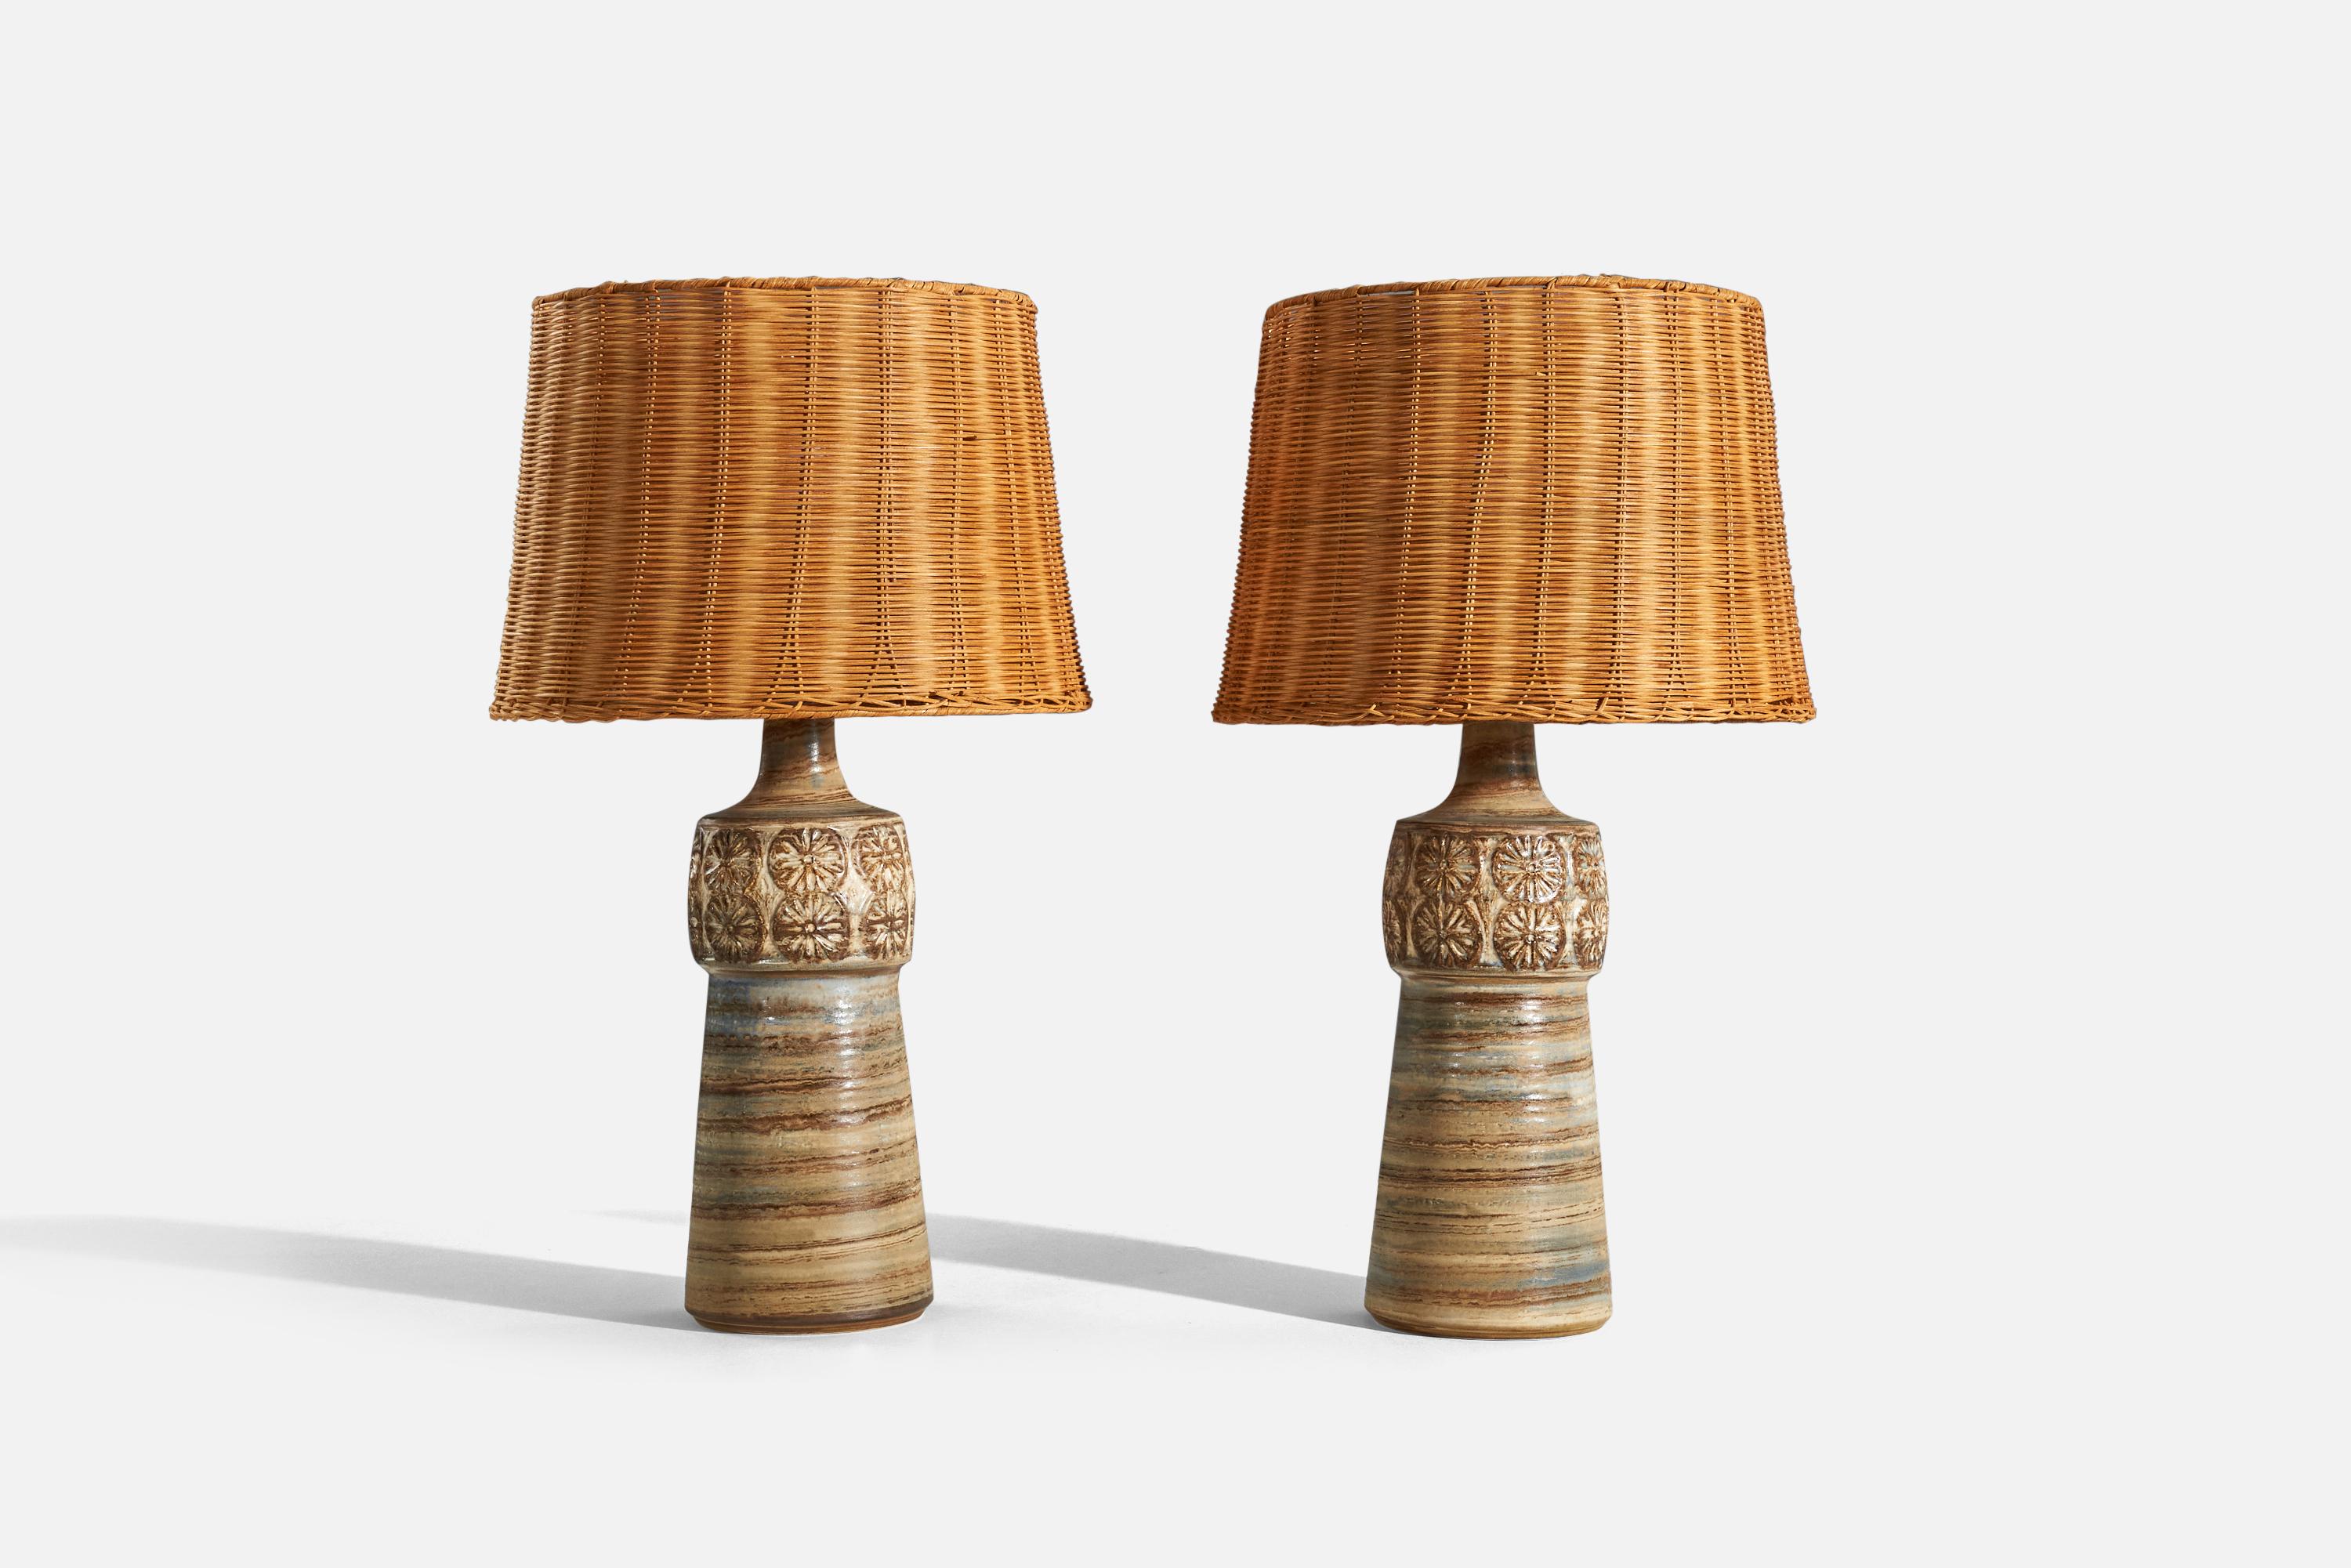 A pair of brown and blue, glazed stoneware table lamps designed and produced by Arne Finne, Denmark, c. 1960s. 

Sold with lampshades upon request. 
Dimensions of Lamp (inches) : 21.43 x 7 x 7 (H x W x D)
Dimensions of Shade (inches) : 13.5 x